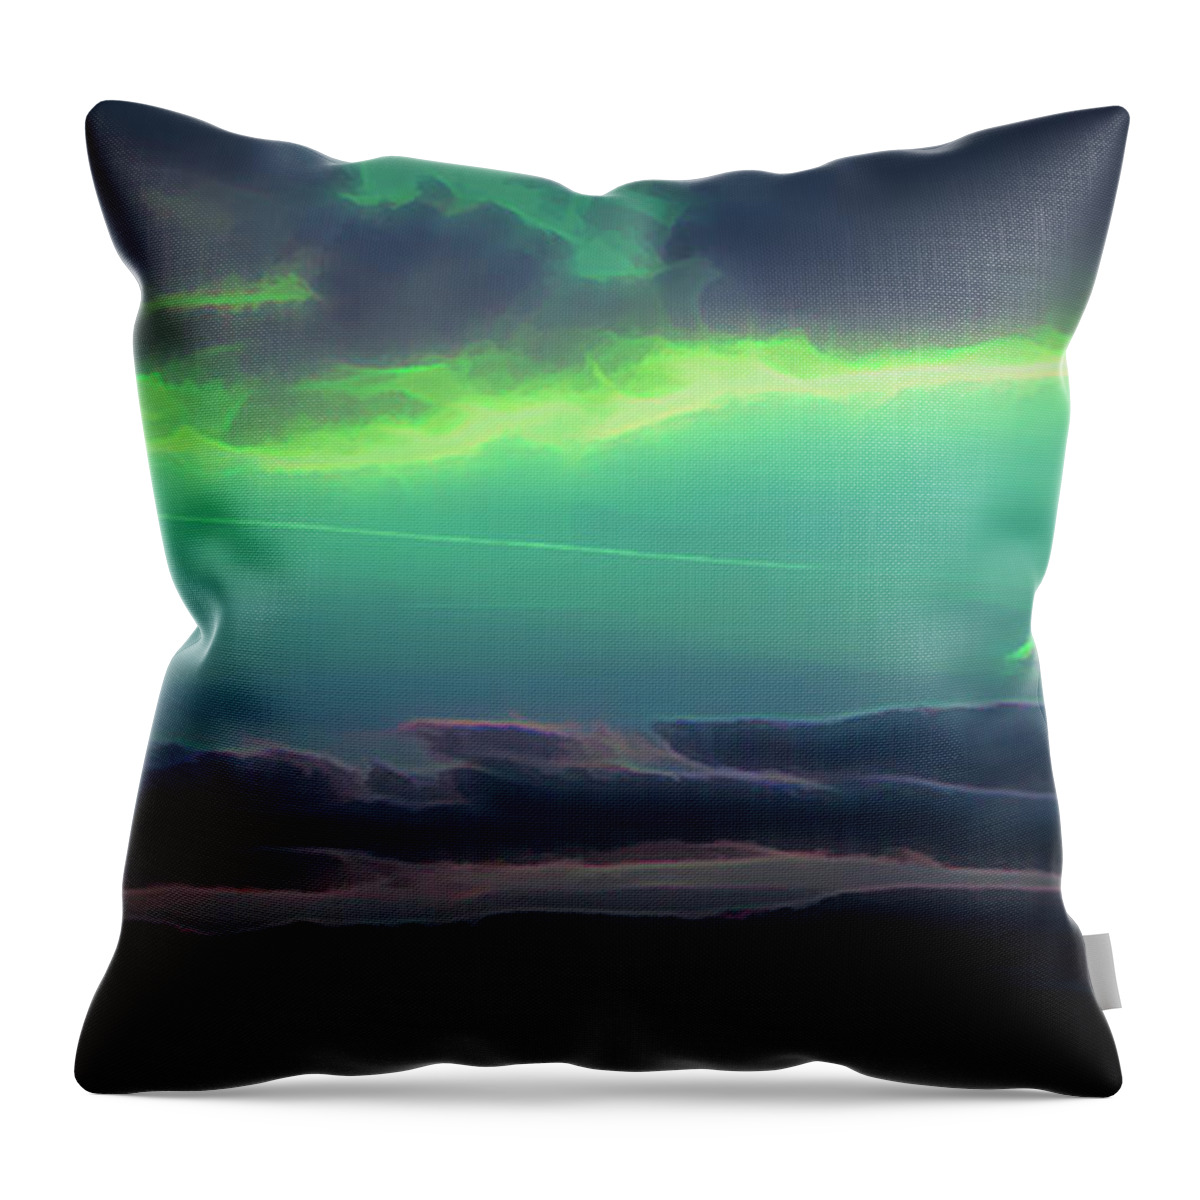 Abstract Throw Pillow featuring the digital art Another World by Scott Lyons